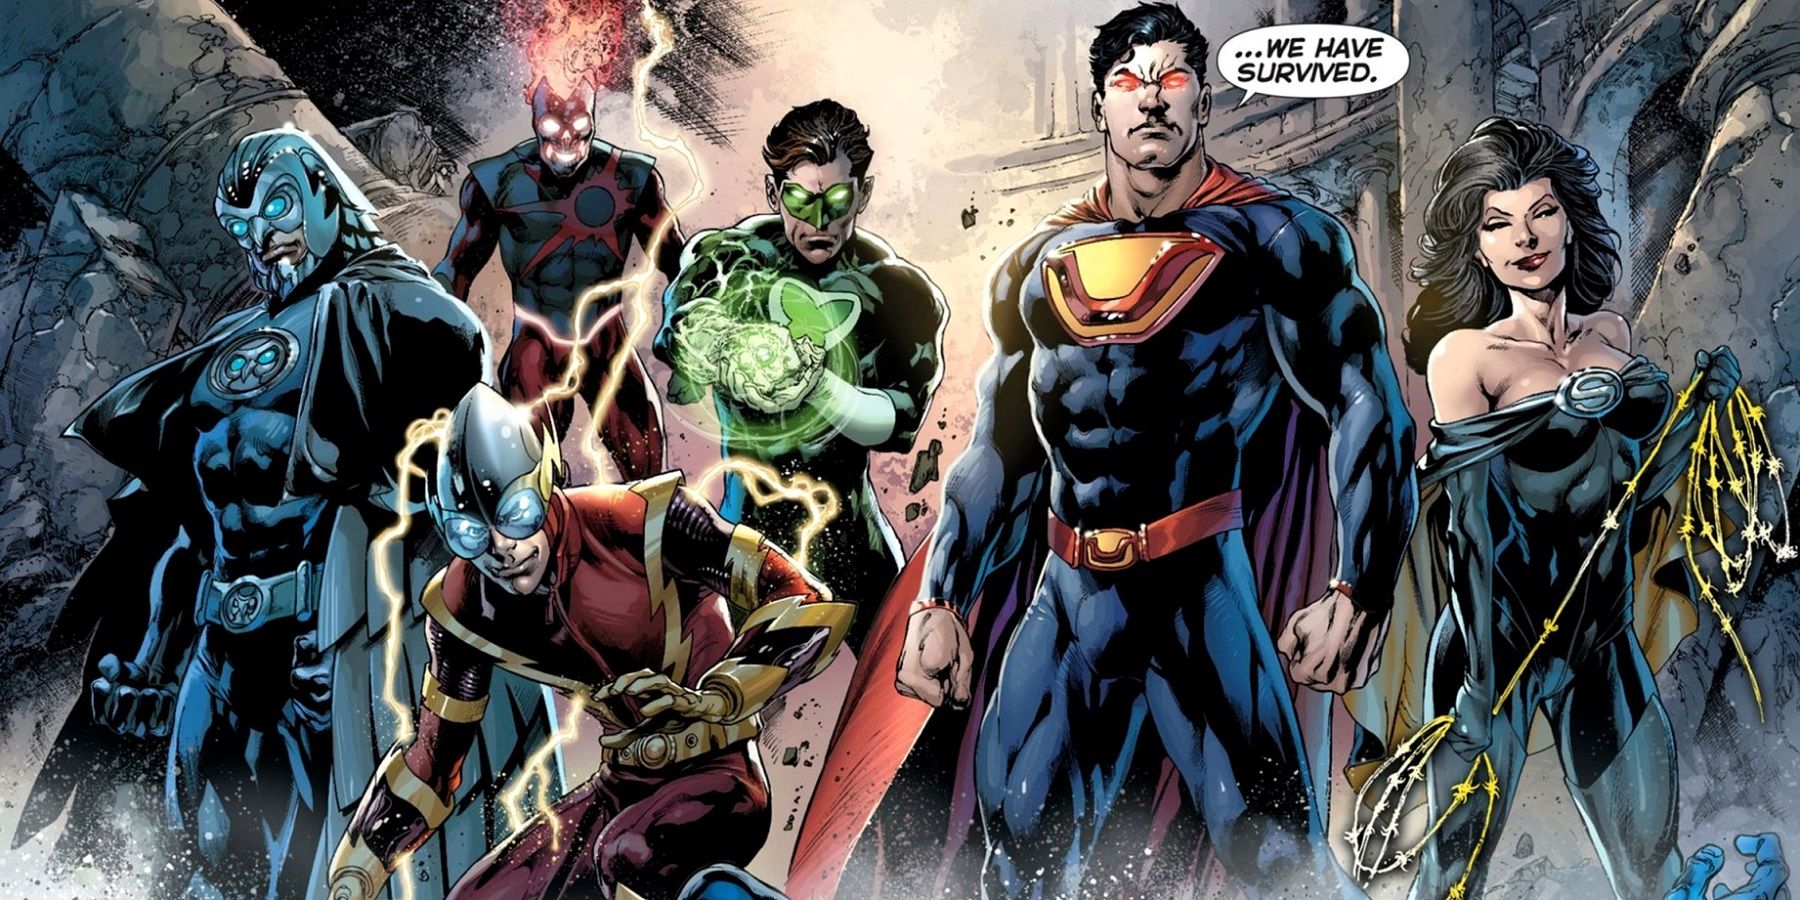 Crime Syndicate from DC Comics